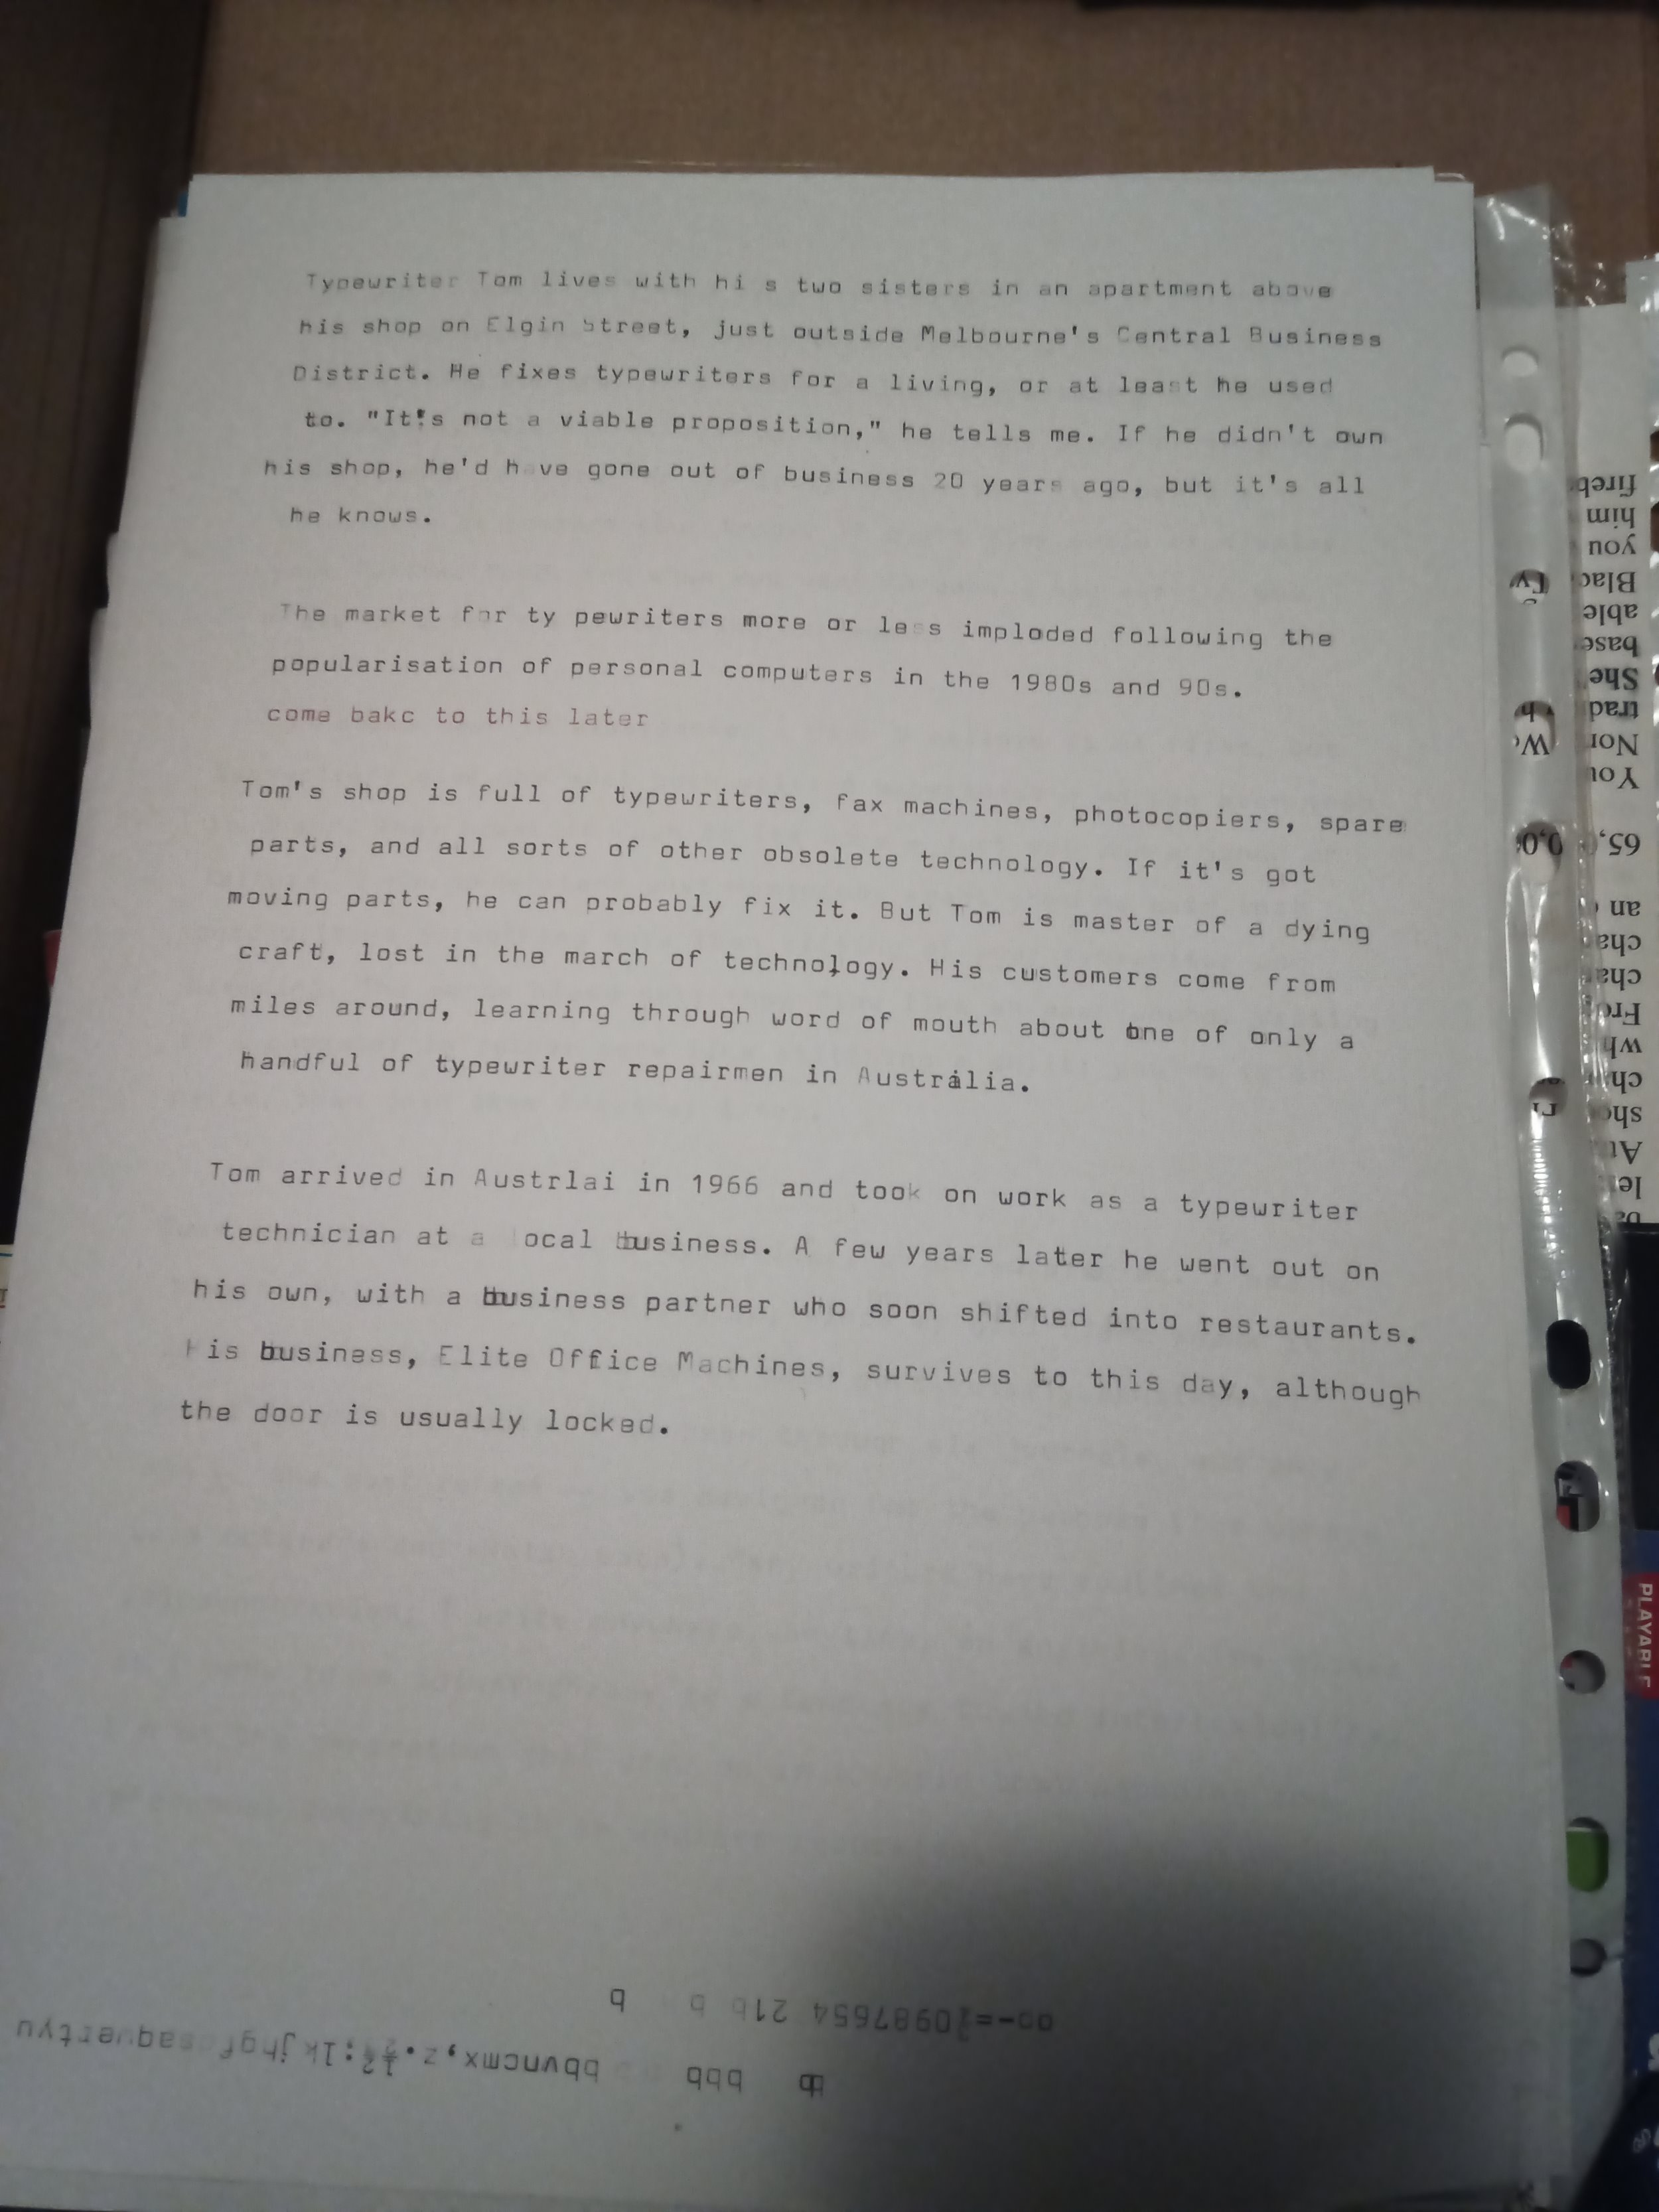 A page of text from the article, beginning "Typewriter Tom lives with his two sisters in an apartment above his shop on Elgin Street, just outside Melbourne's Central Business District. He fixes typewriters for a living, or at least he used to."